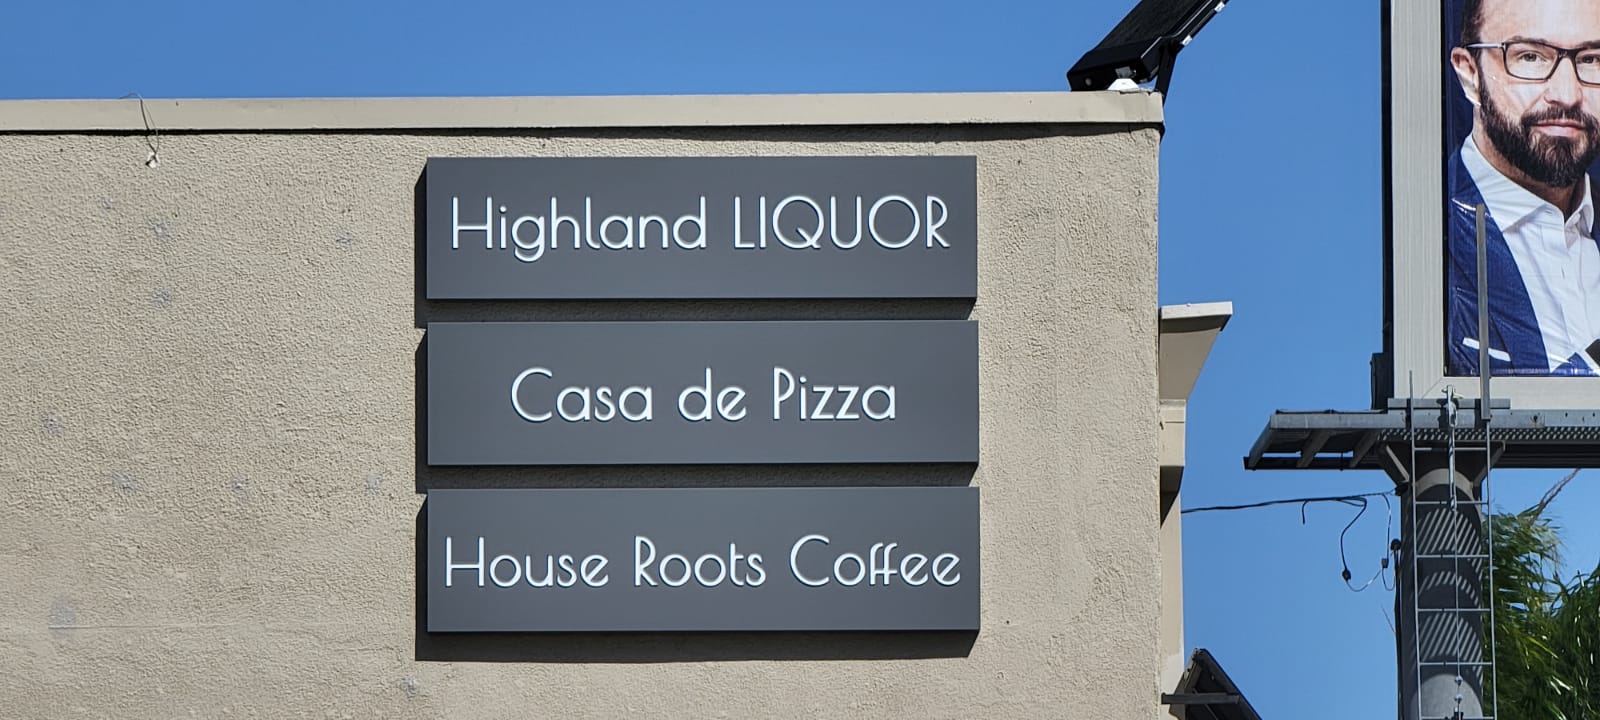 These are push through light box signs for Highland Mini Mall in Granada Hills for the liquor store as well as the other establishments there.